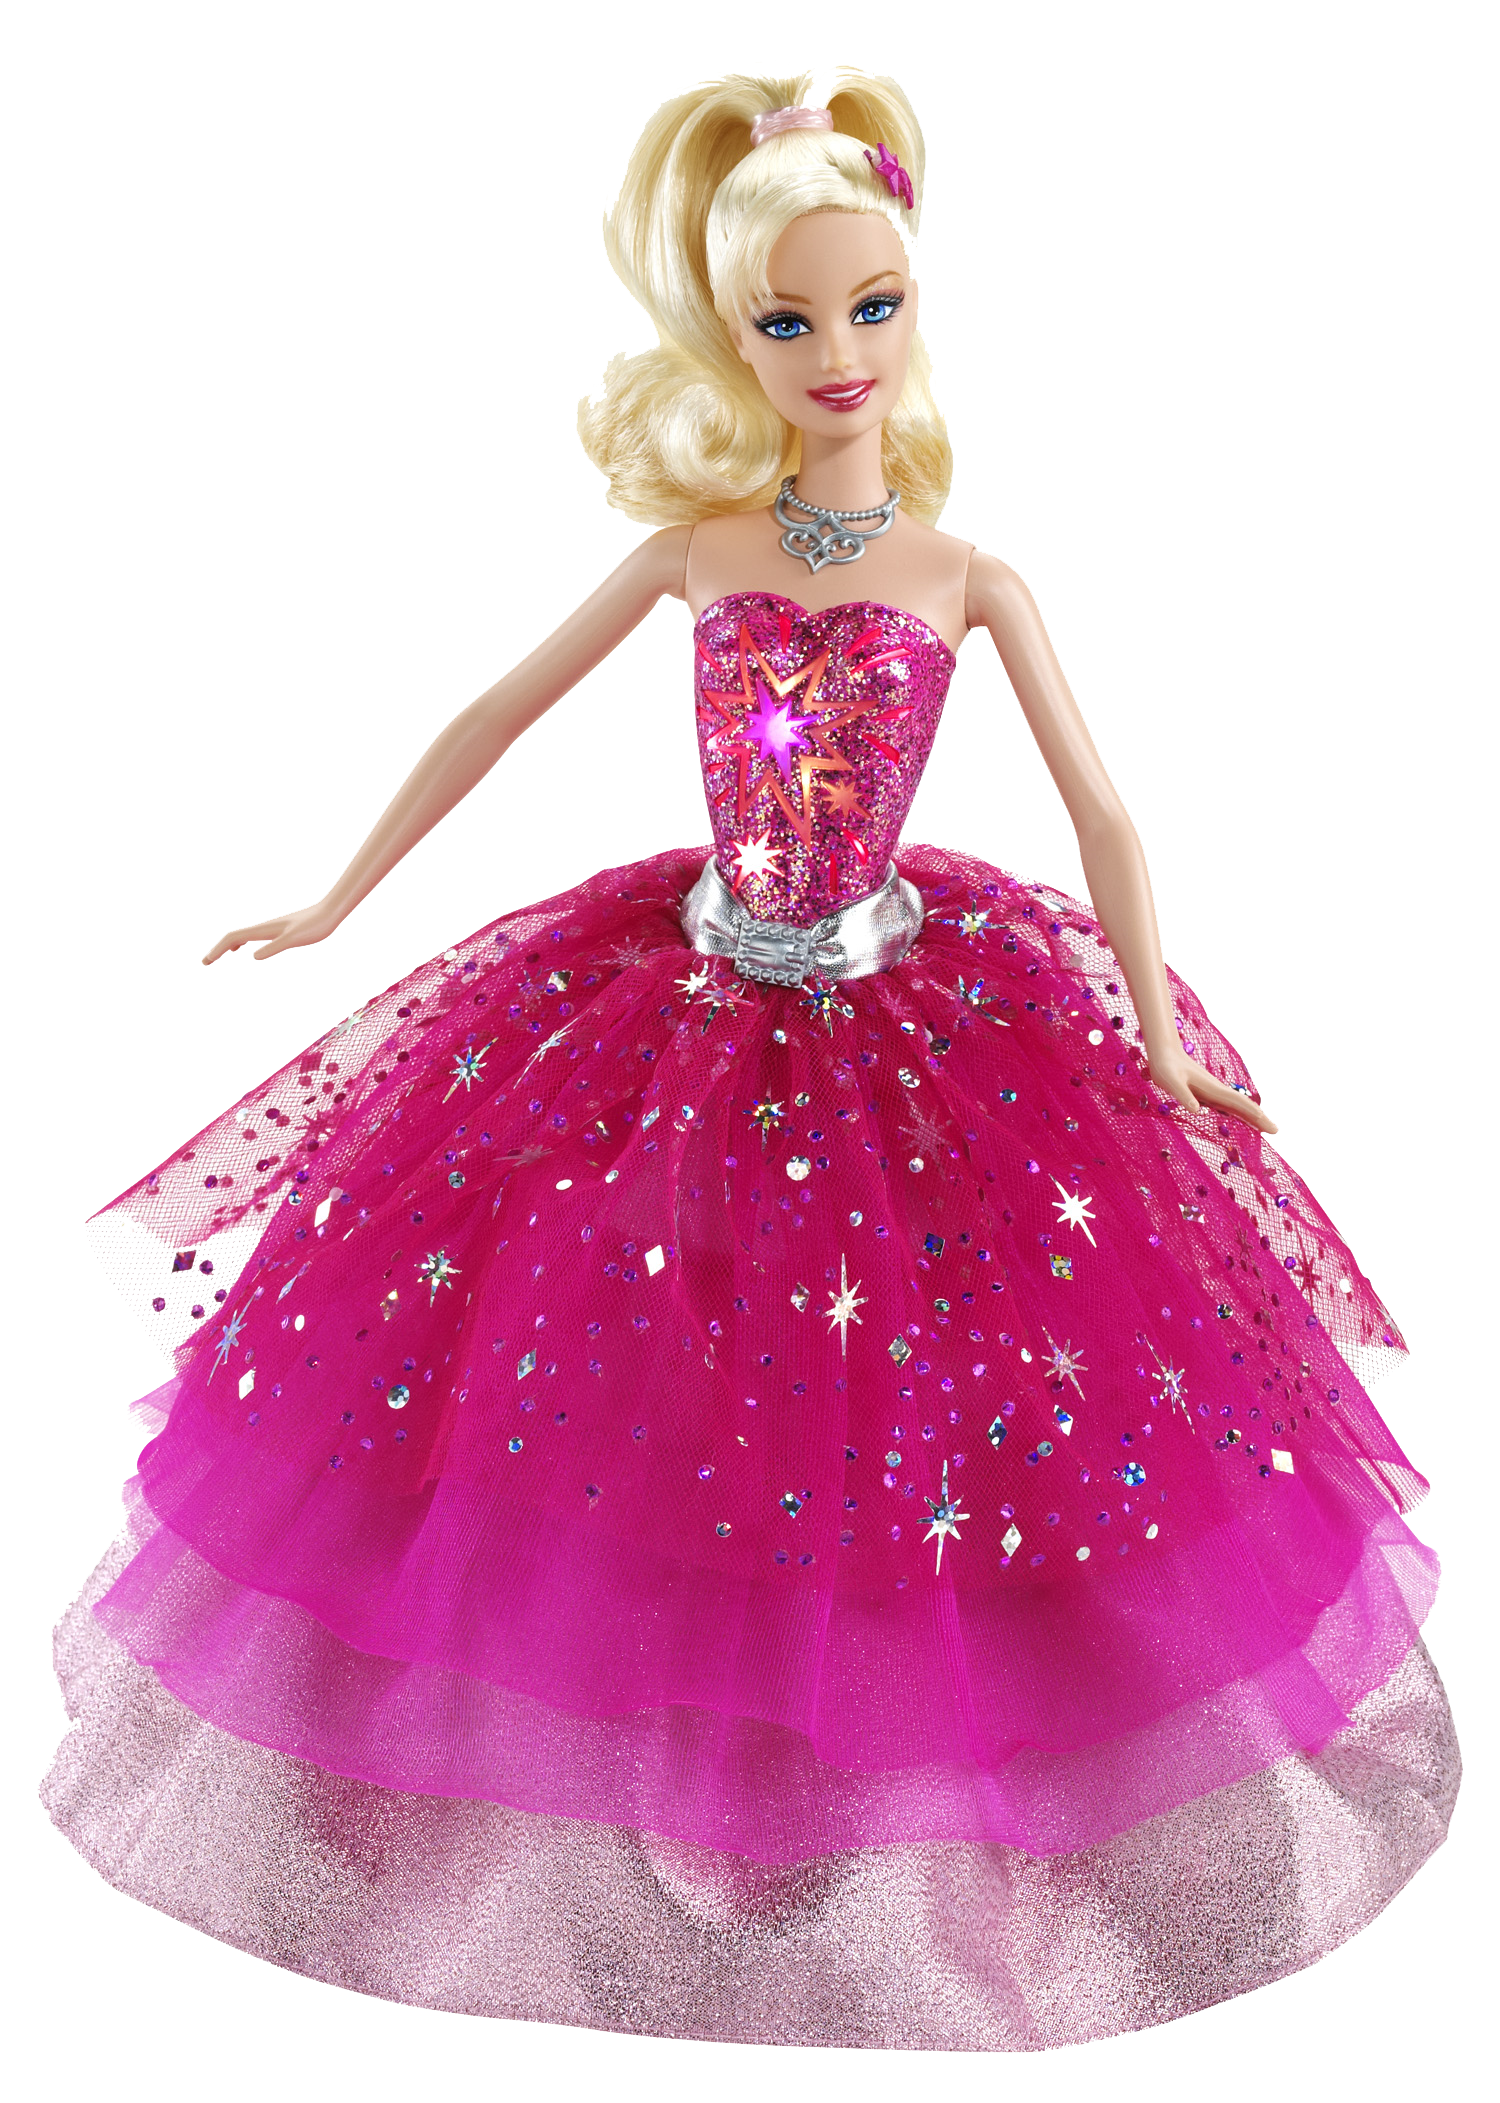 Barbie Doll Free PNG Image | PNG All